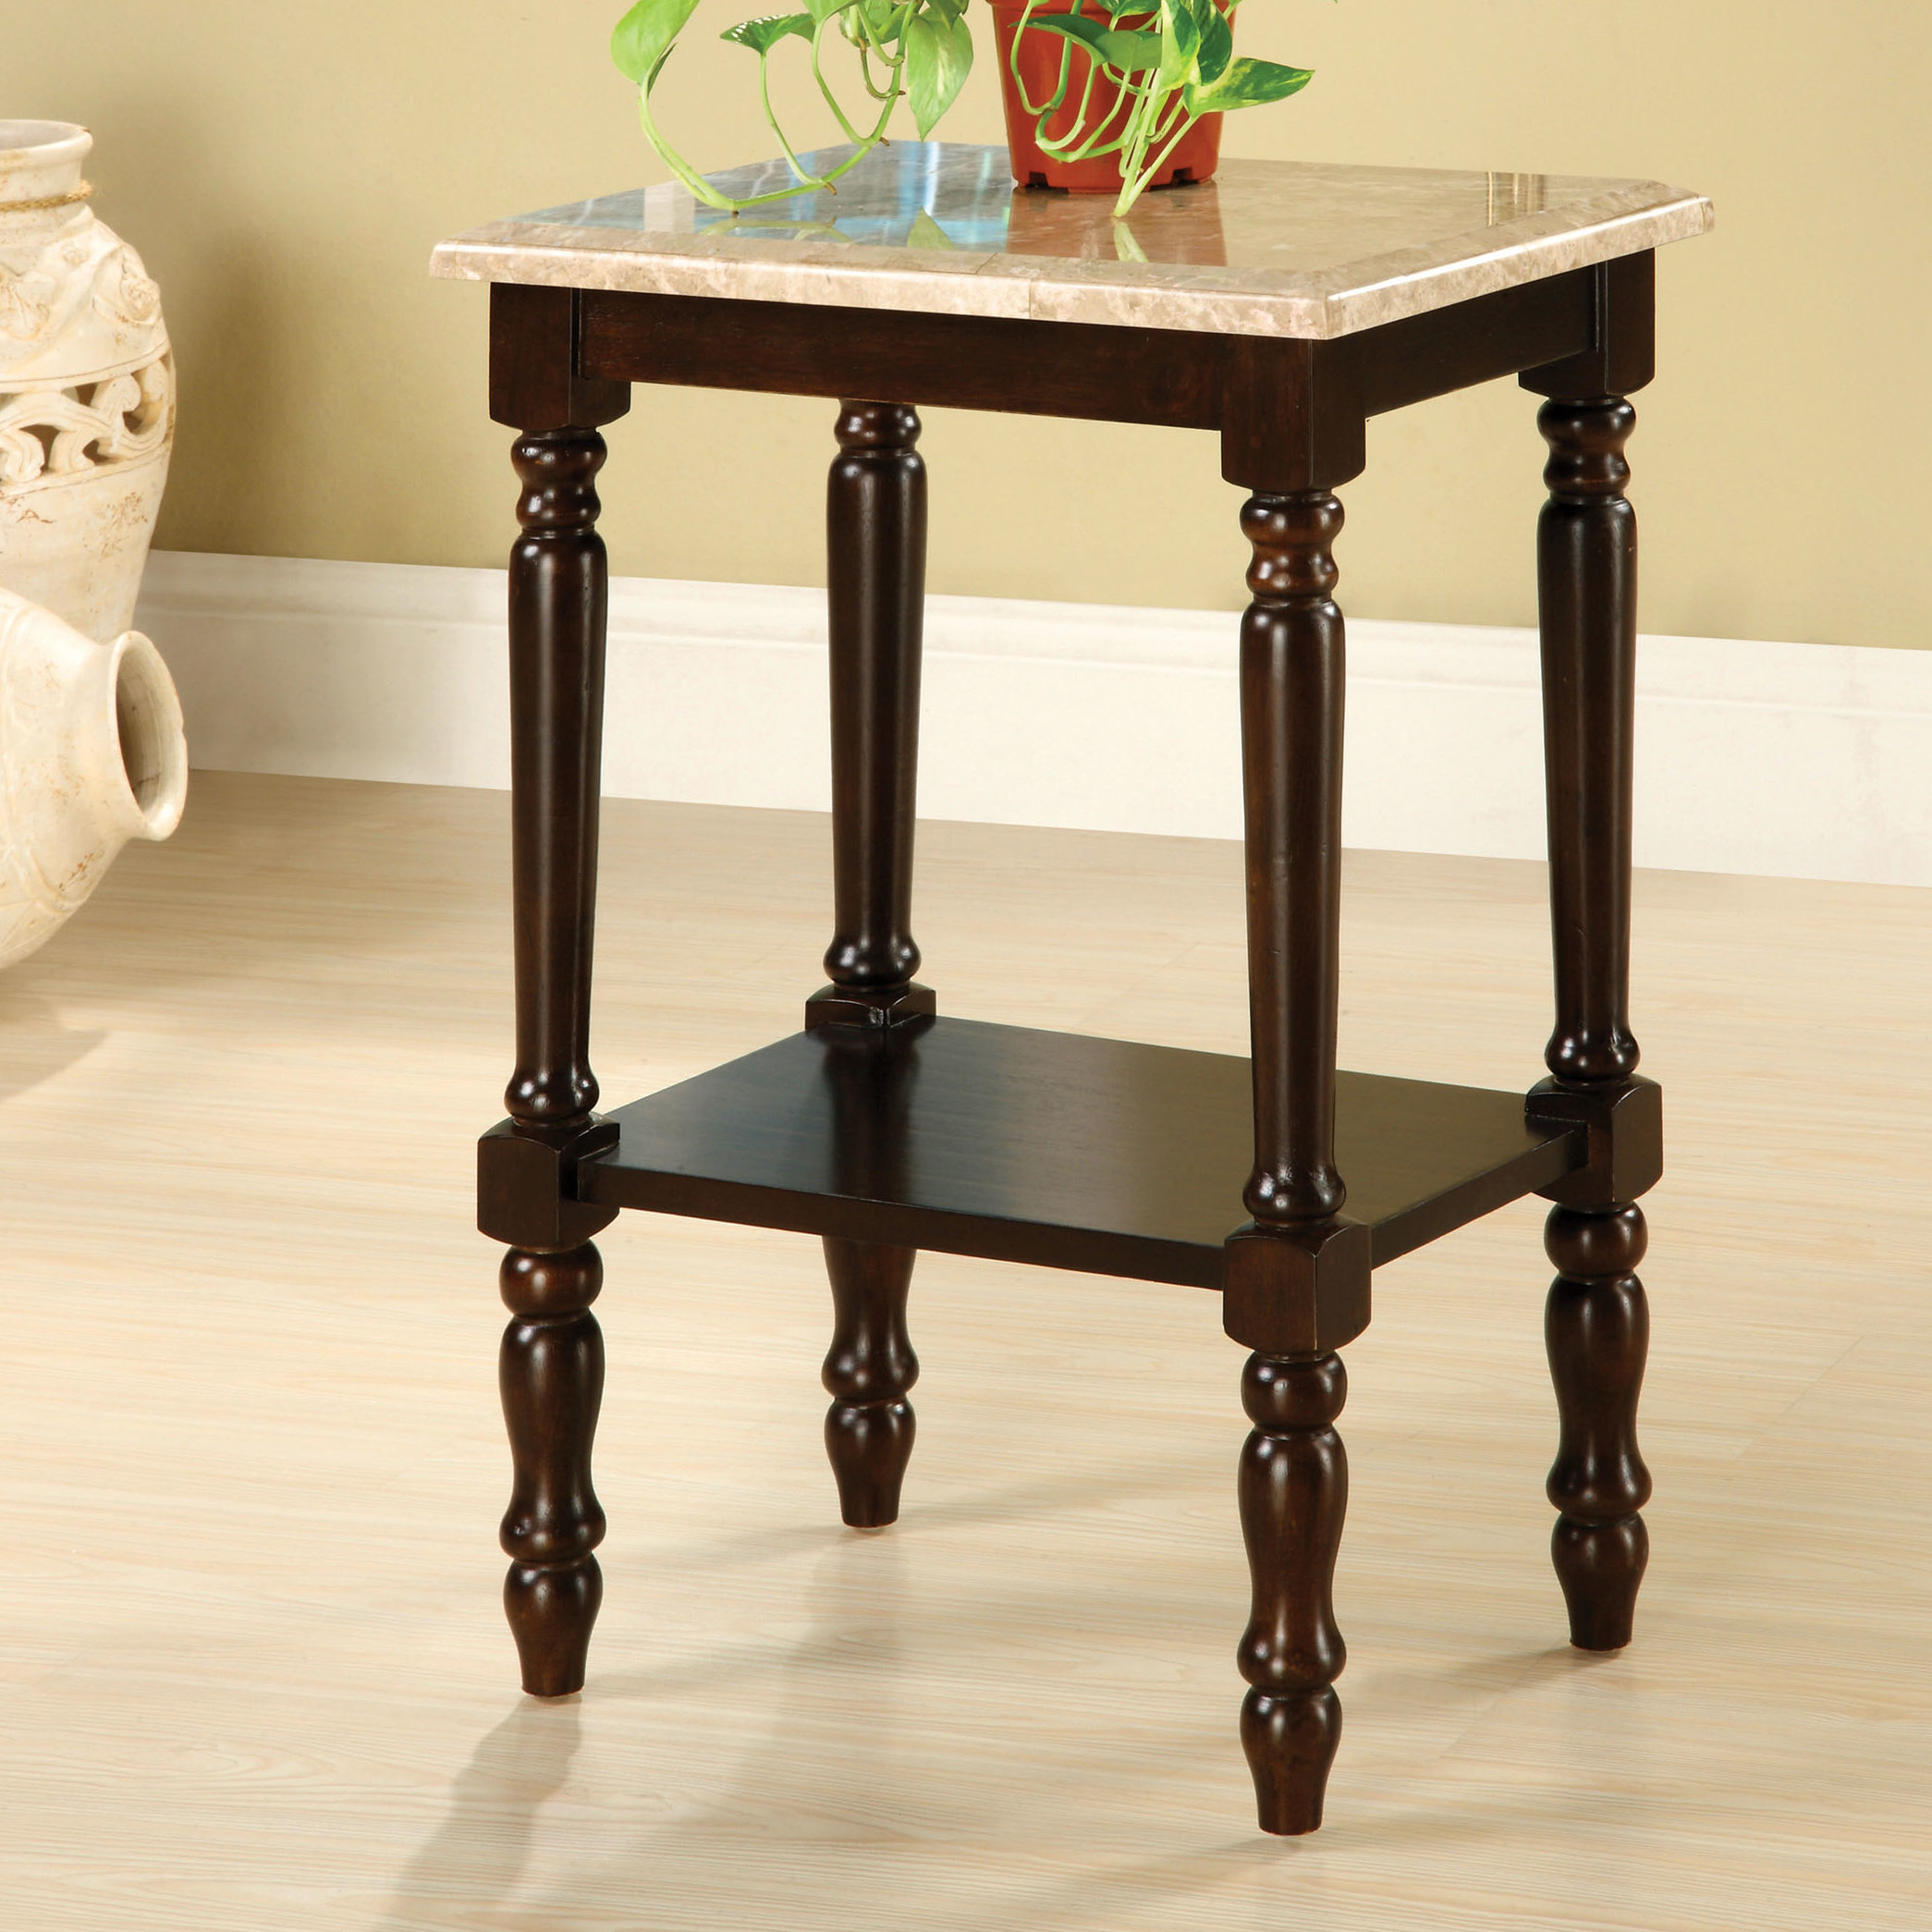 astoria grand biddlesden end table reviews coffee accent pieces tall decorative cabinet battery operated lamp with timer nesting tables ikea dale tiffany shade dinner set dark